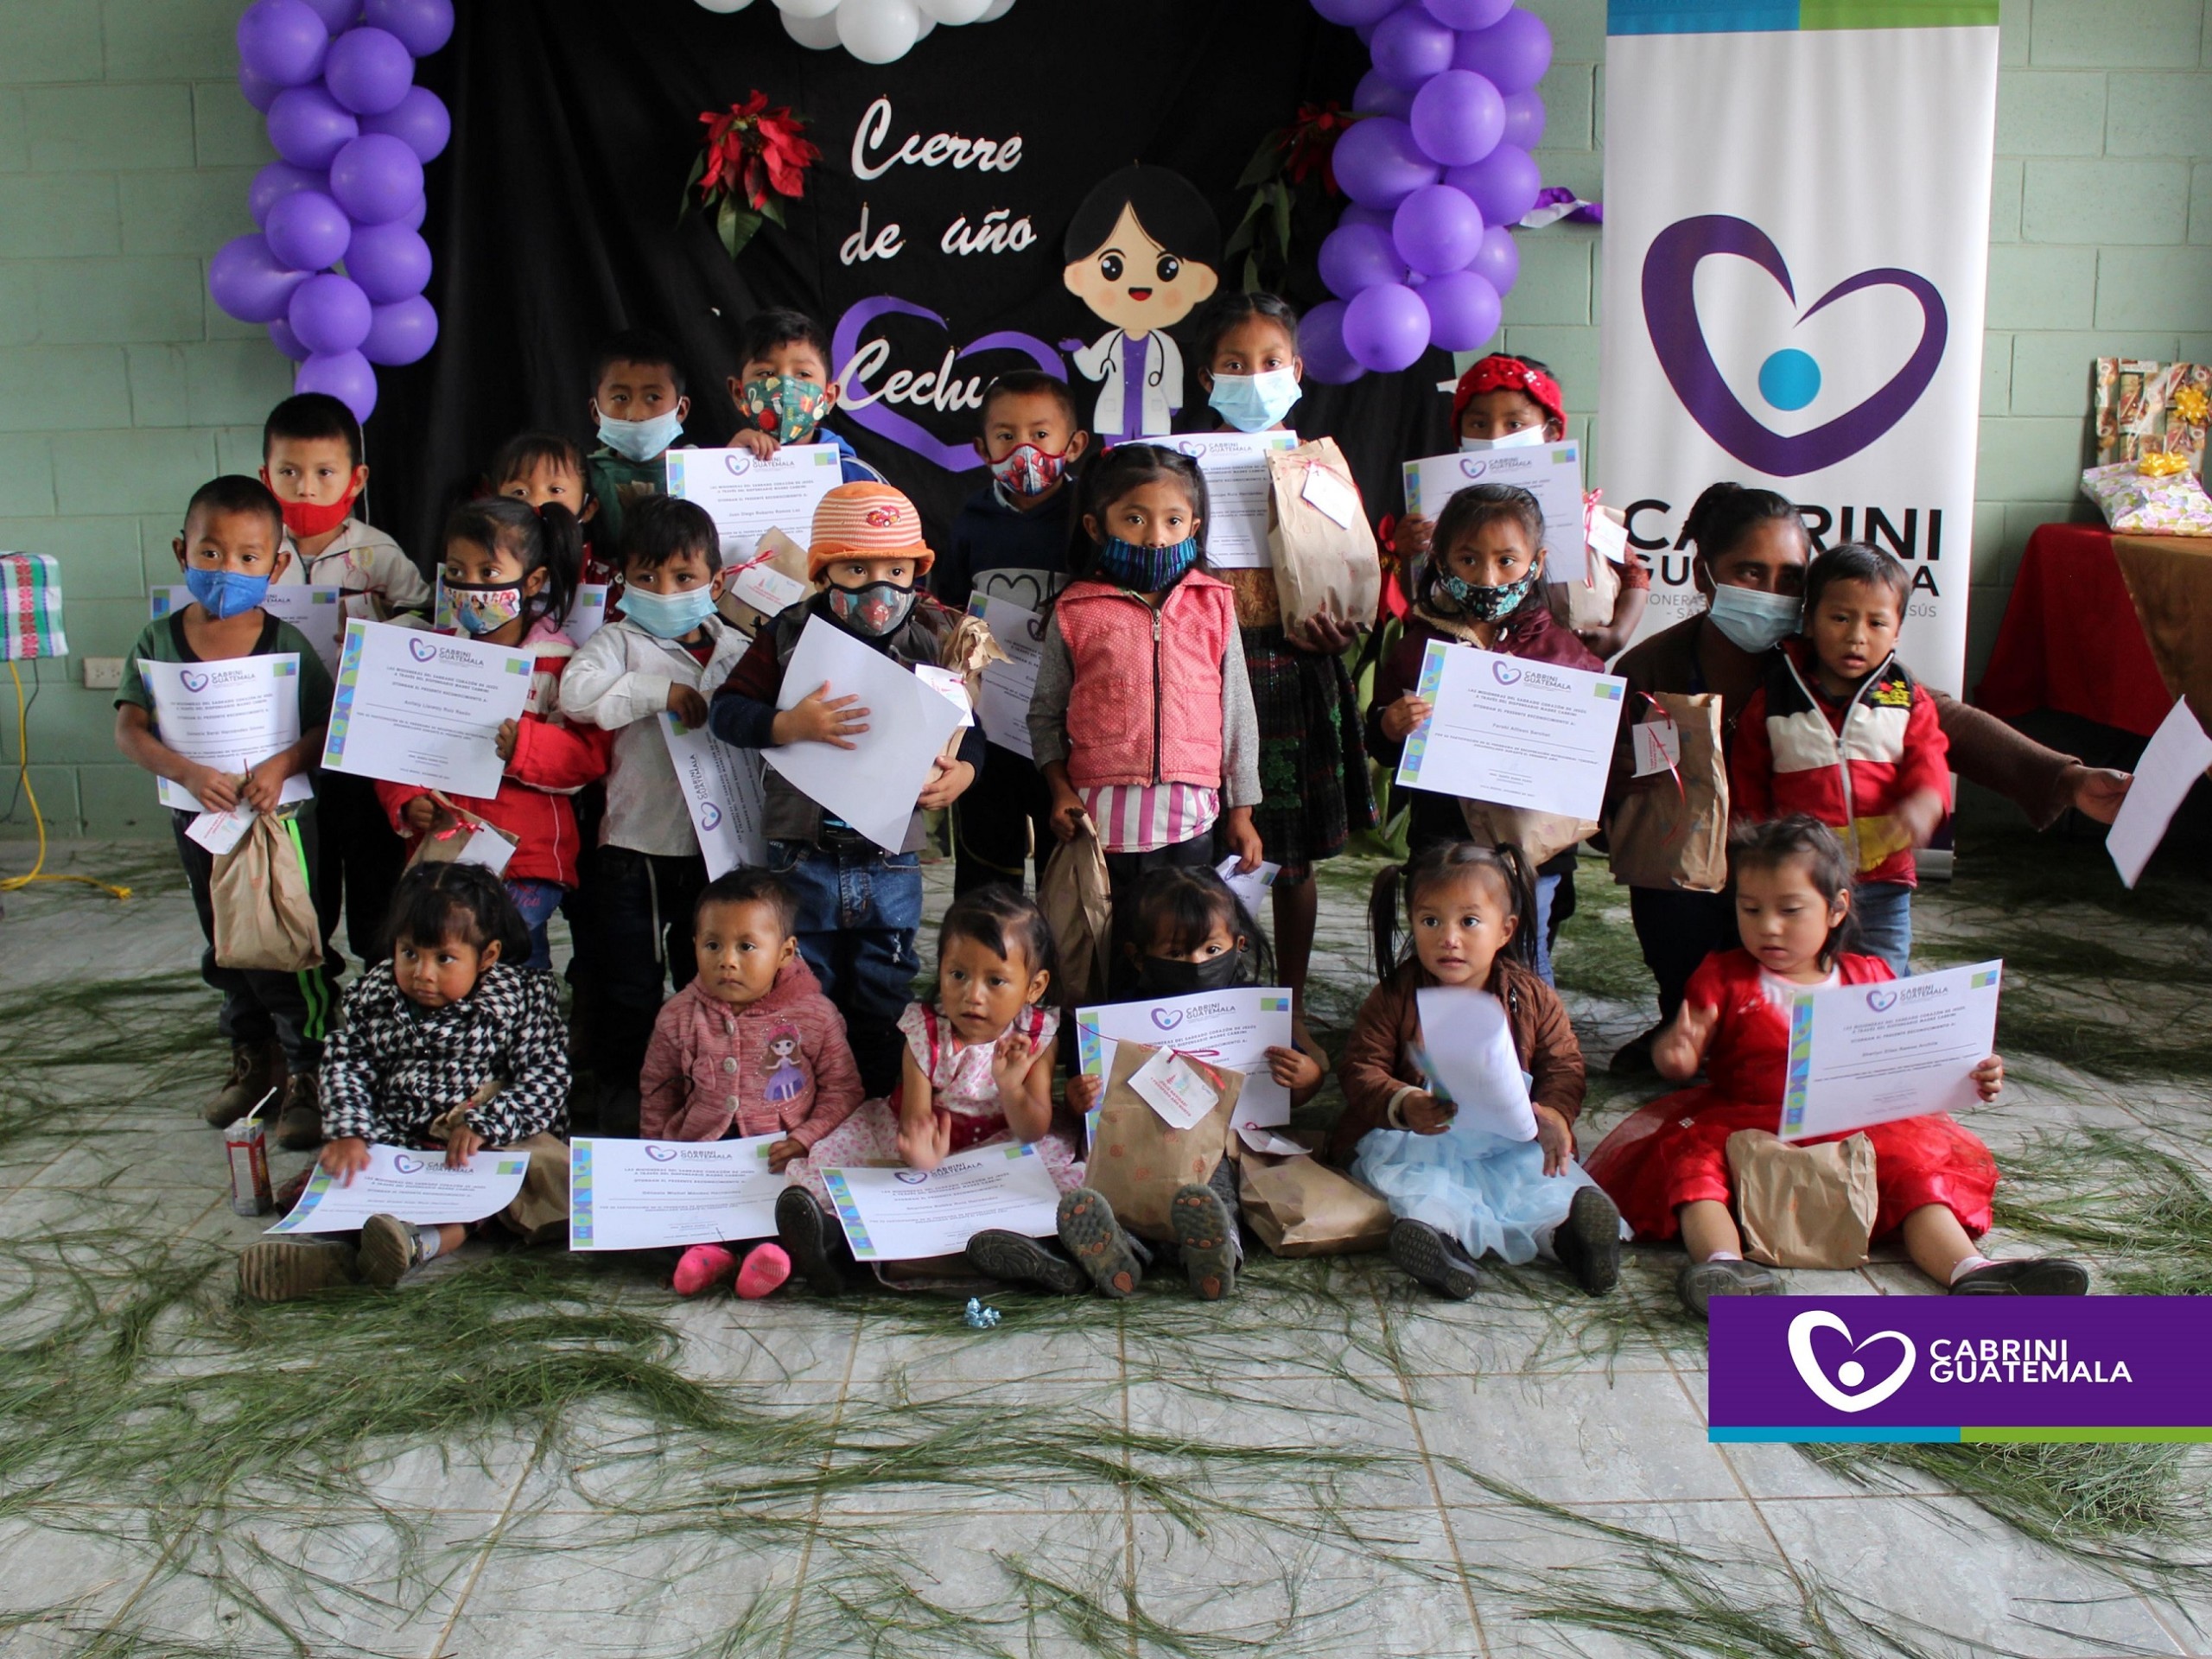 A group of children posing with certificates about Cabrini Guatemala